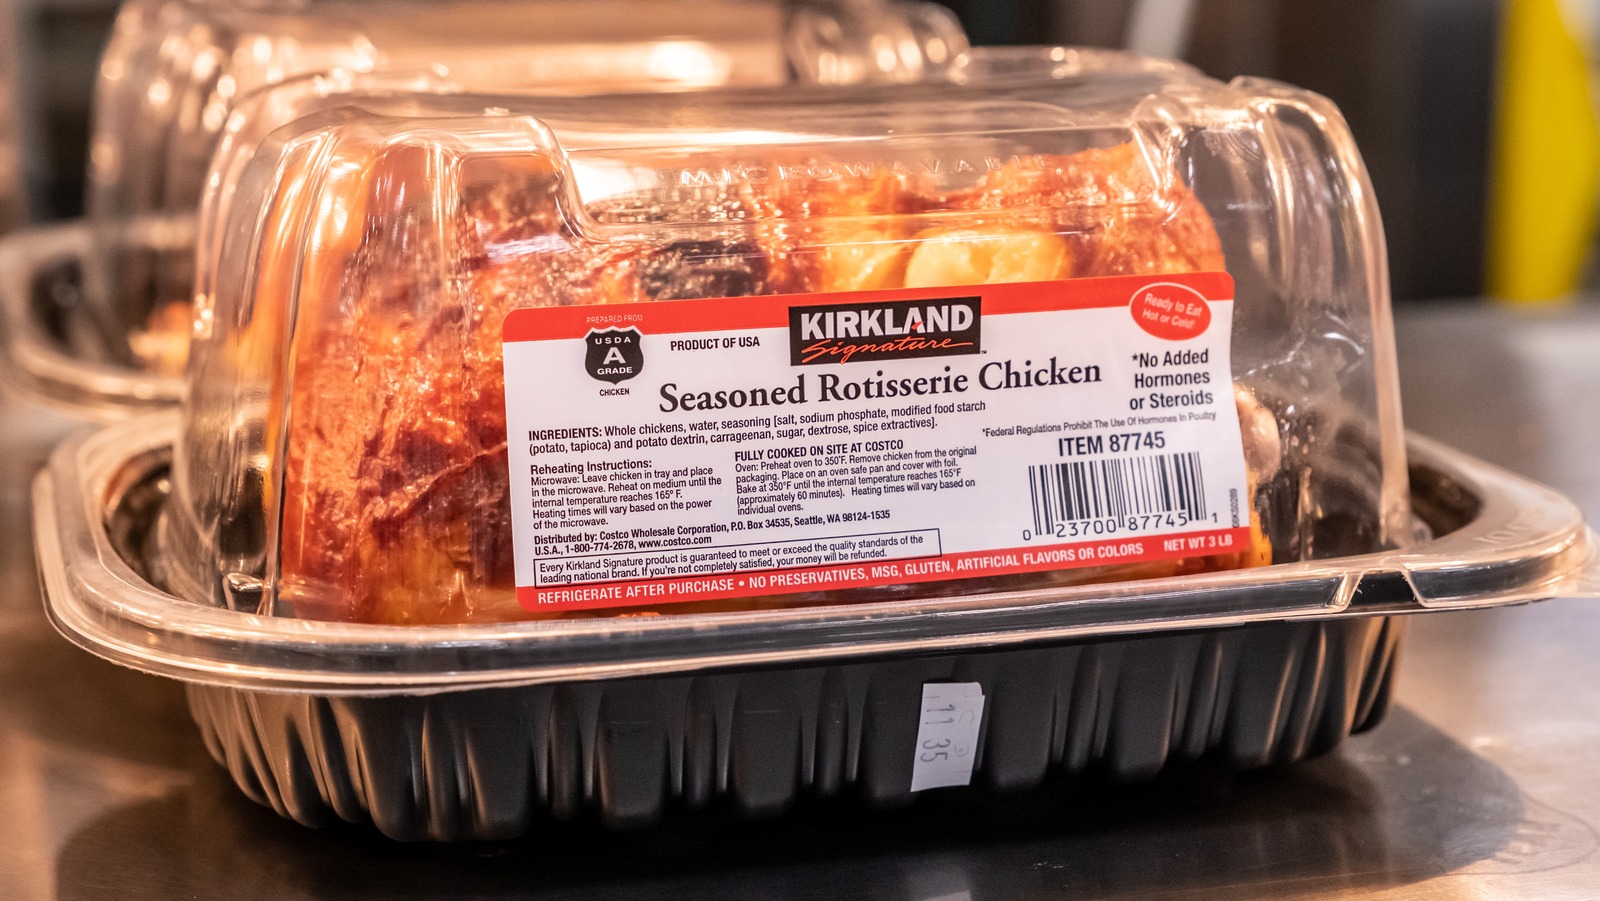 https://www.thedailymeal.com/img/gallery/8-secrets-of-the-4-99-costco-rotisserie-chicken/l-intro-1679928404.jpg